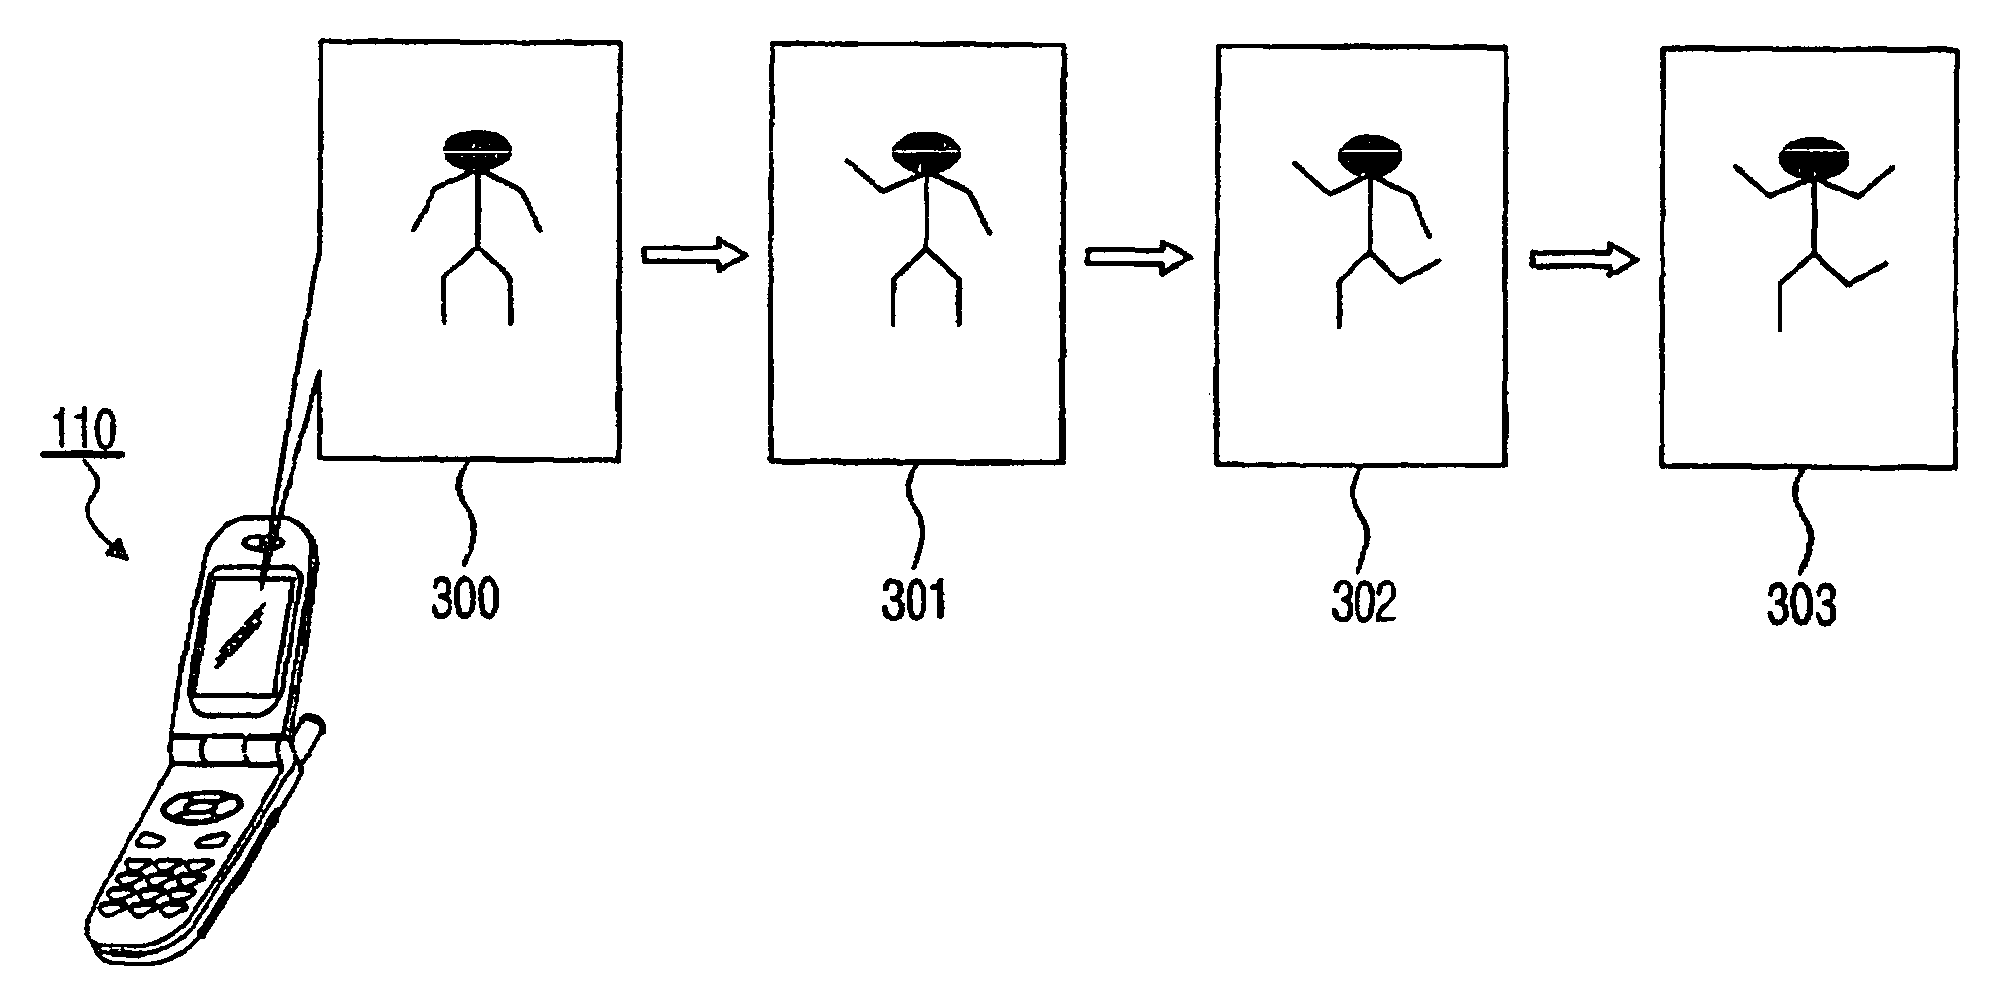 System and method for remotely controlling character avatar image using mobile phone